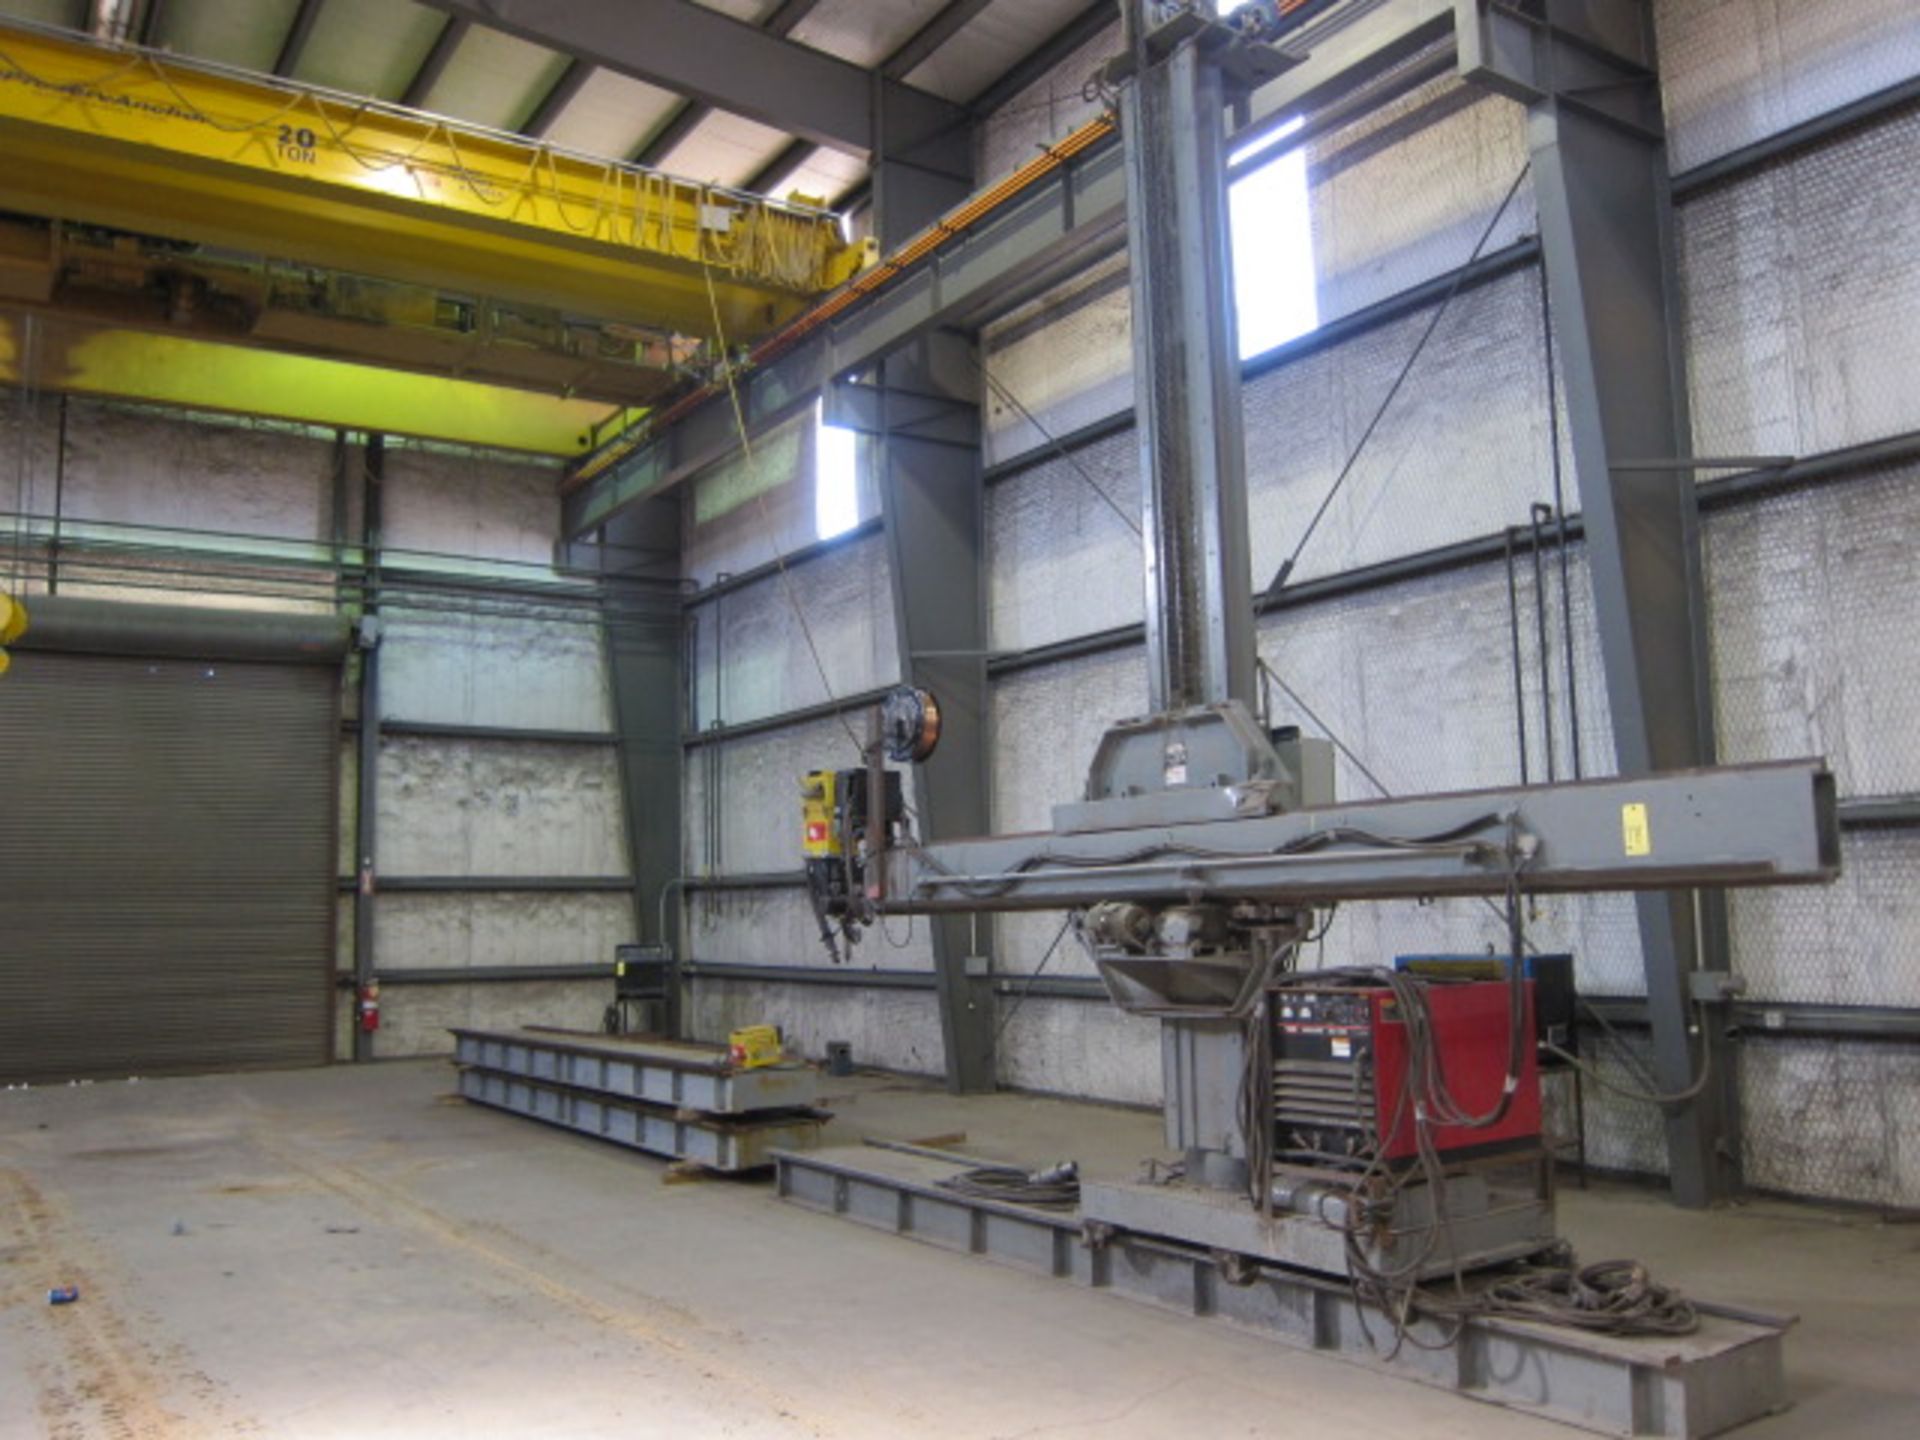 WELDING MANIPULATOR, RANSOME MDL. 1212, 12' x 12' travels, track base w/14' travel, spare track base